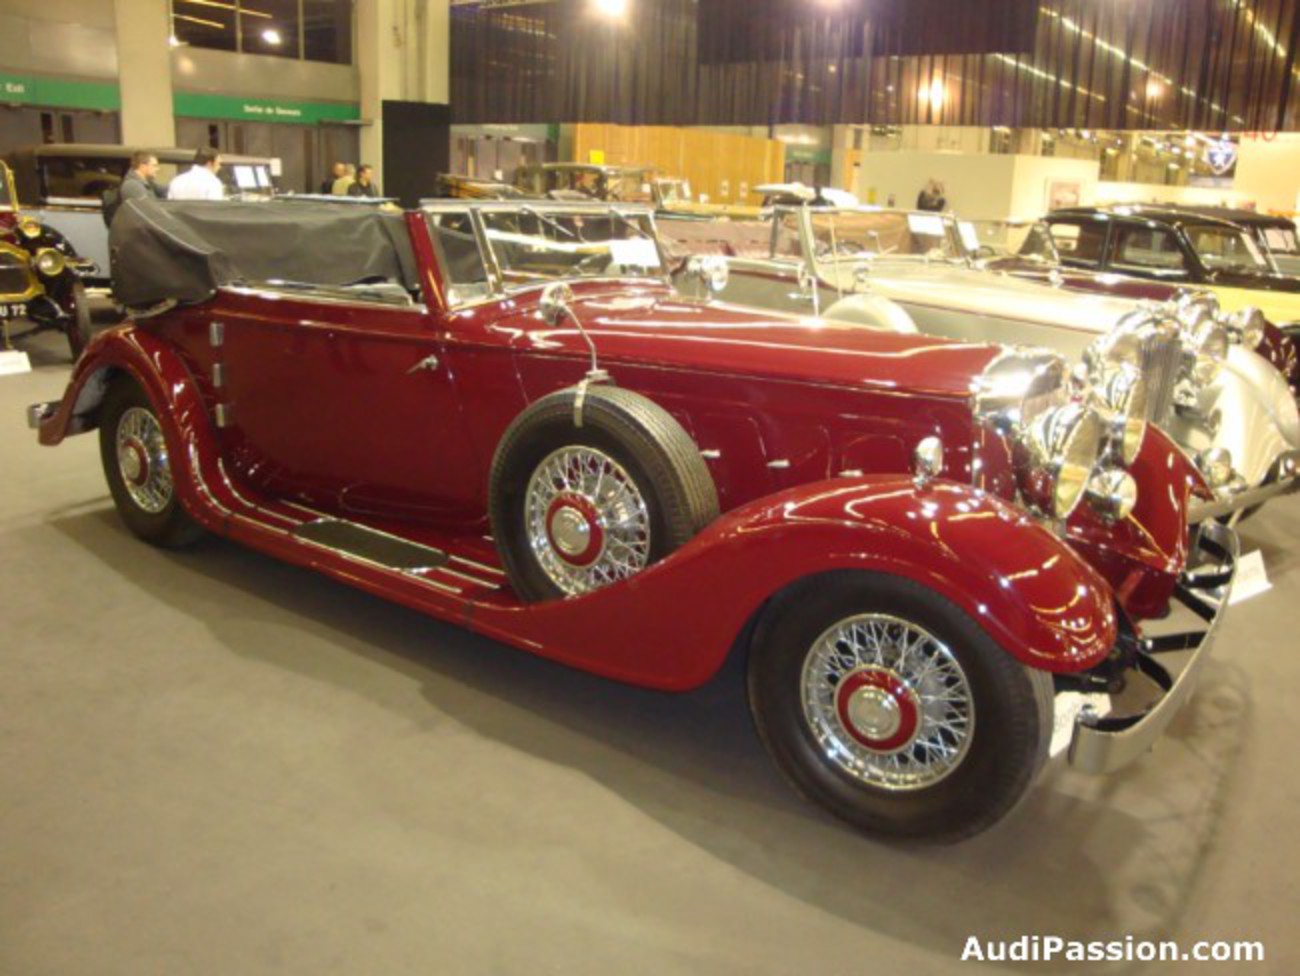 Horch 780b Photo Gallery: Photo #12 out of 11, Image Size - 650 x ...